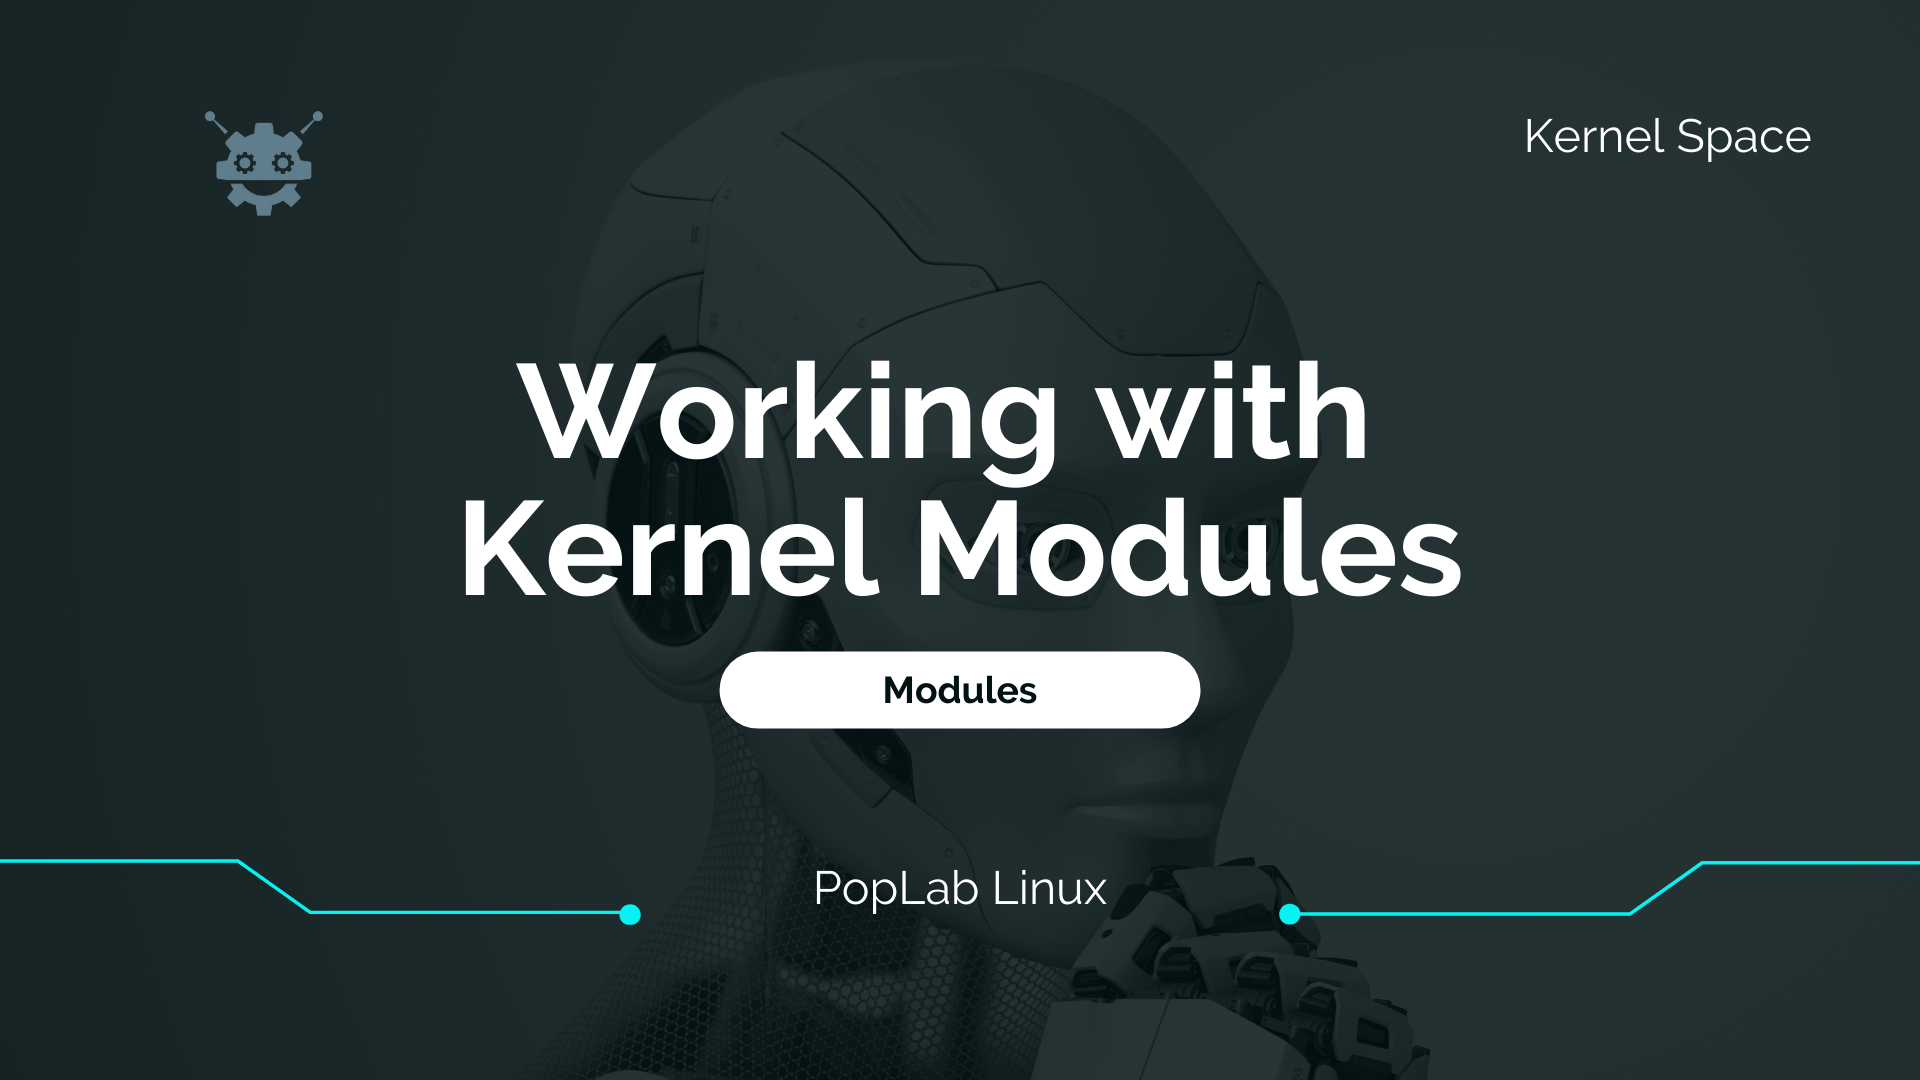 Working with Kernel Modules